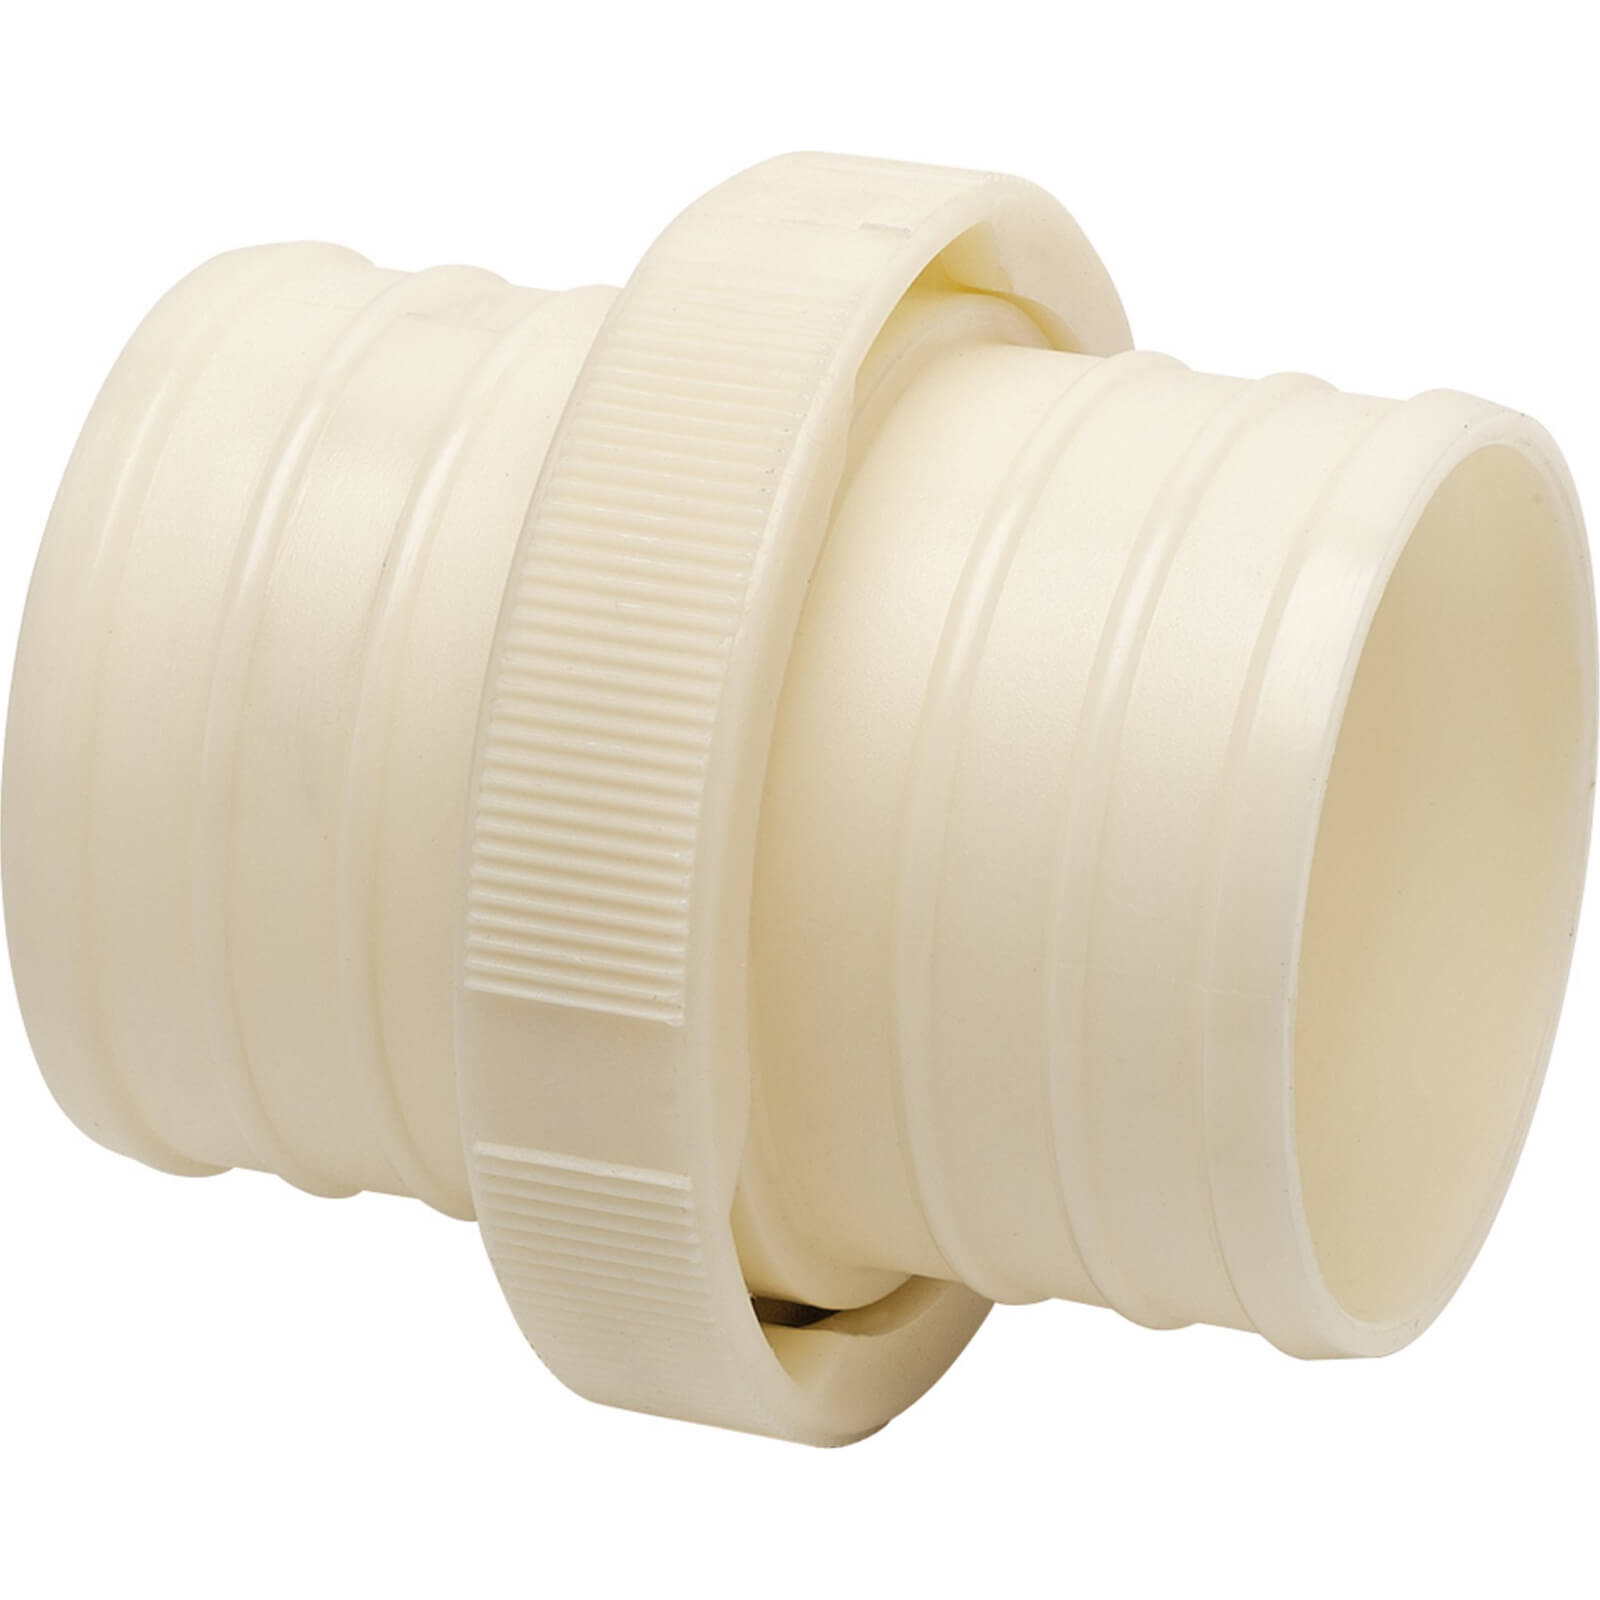 Image of Draper Lay Flat Hose Coupling Adaptor or Connector 2" / 50mm